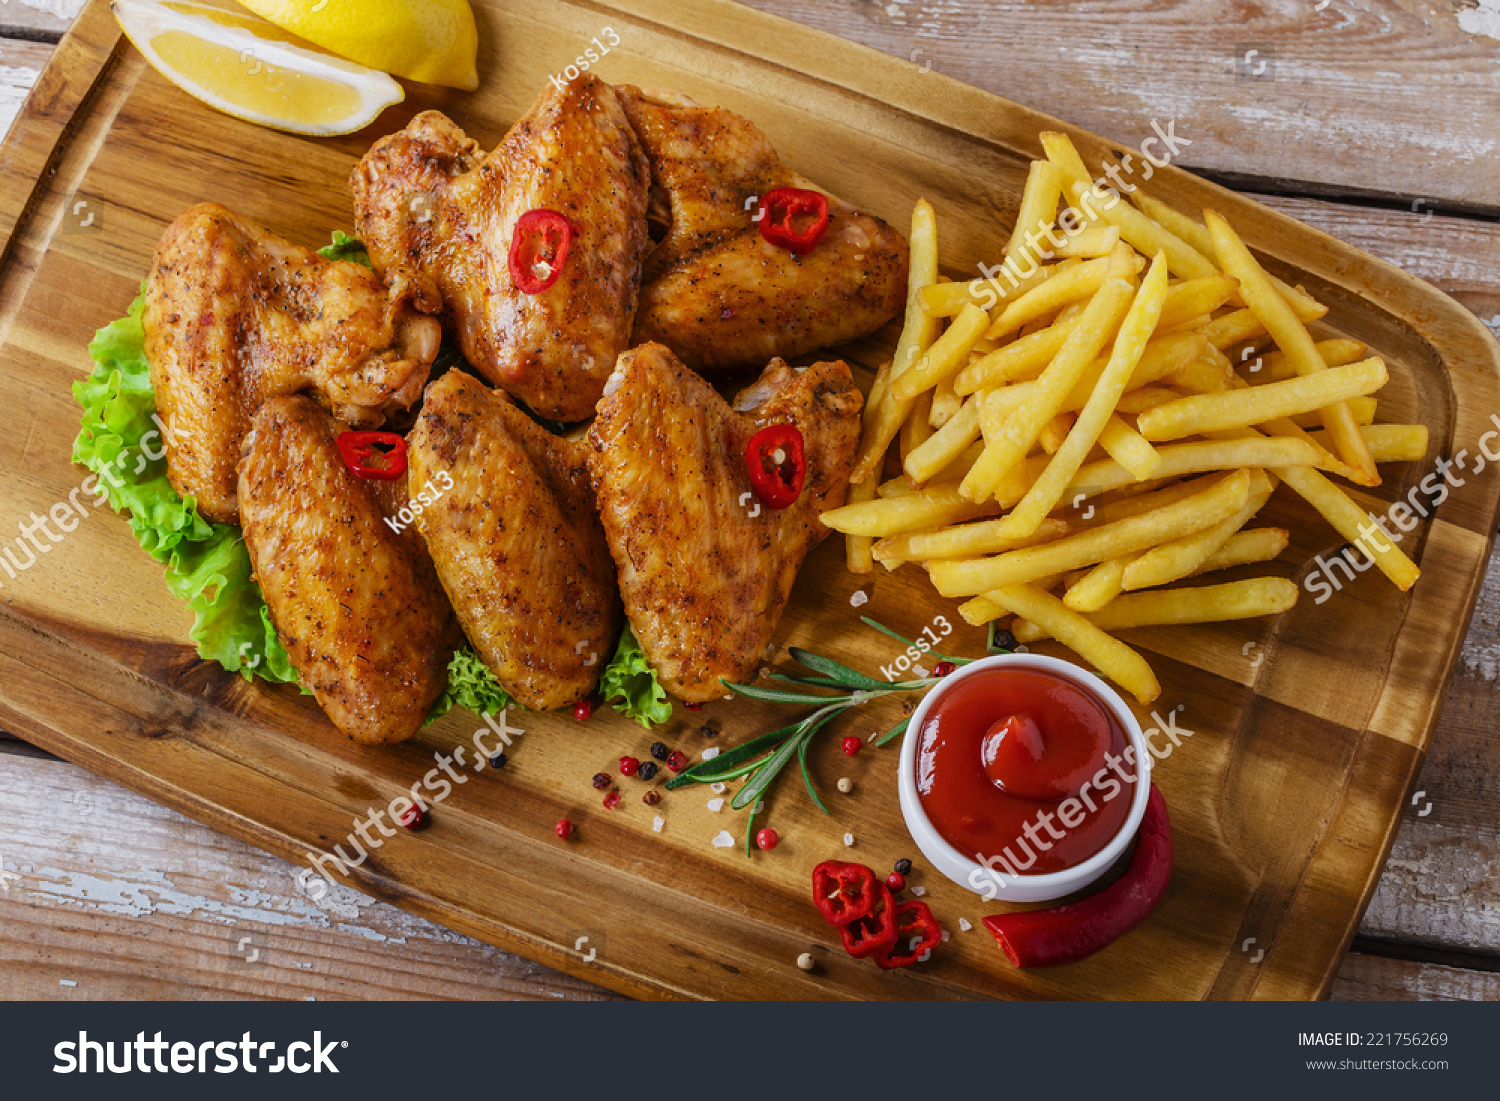 Fried Chicken Wings With Red Sauce And French Fries Stock Photo ...